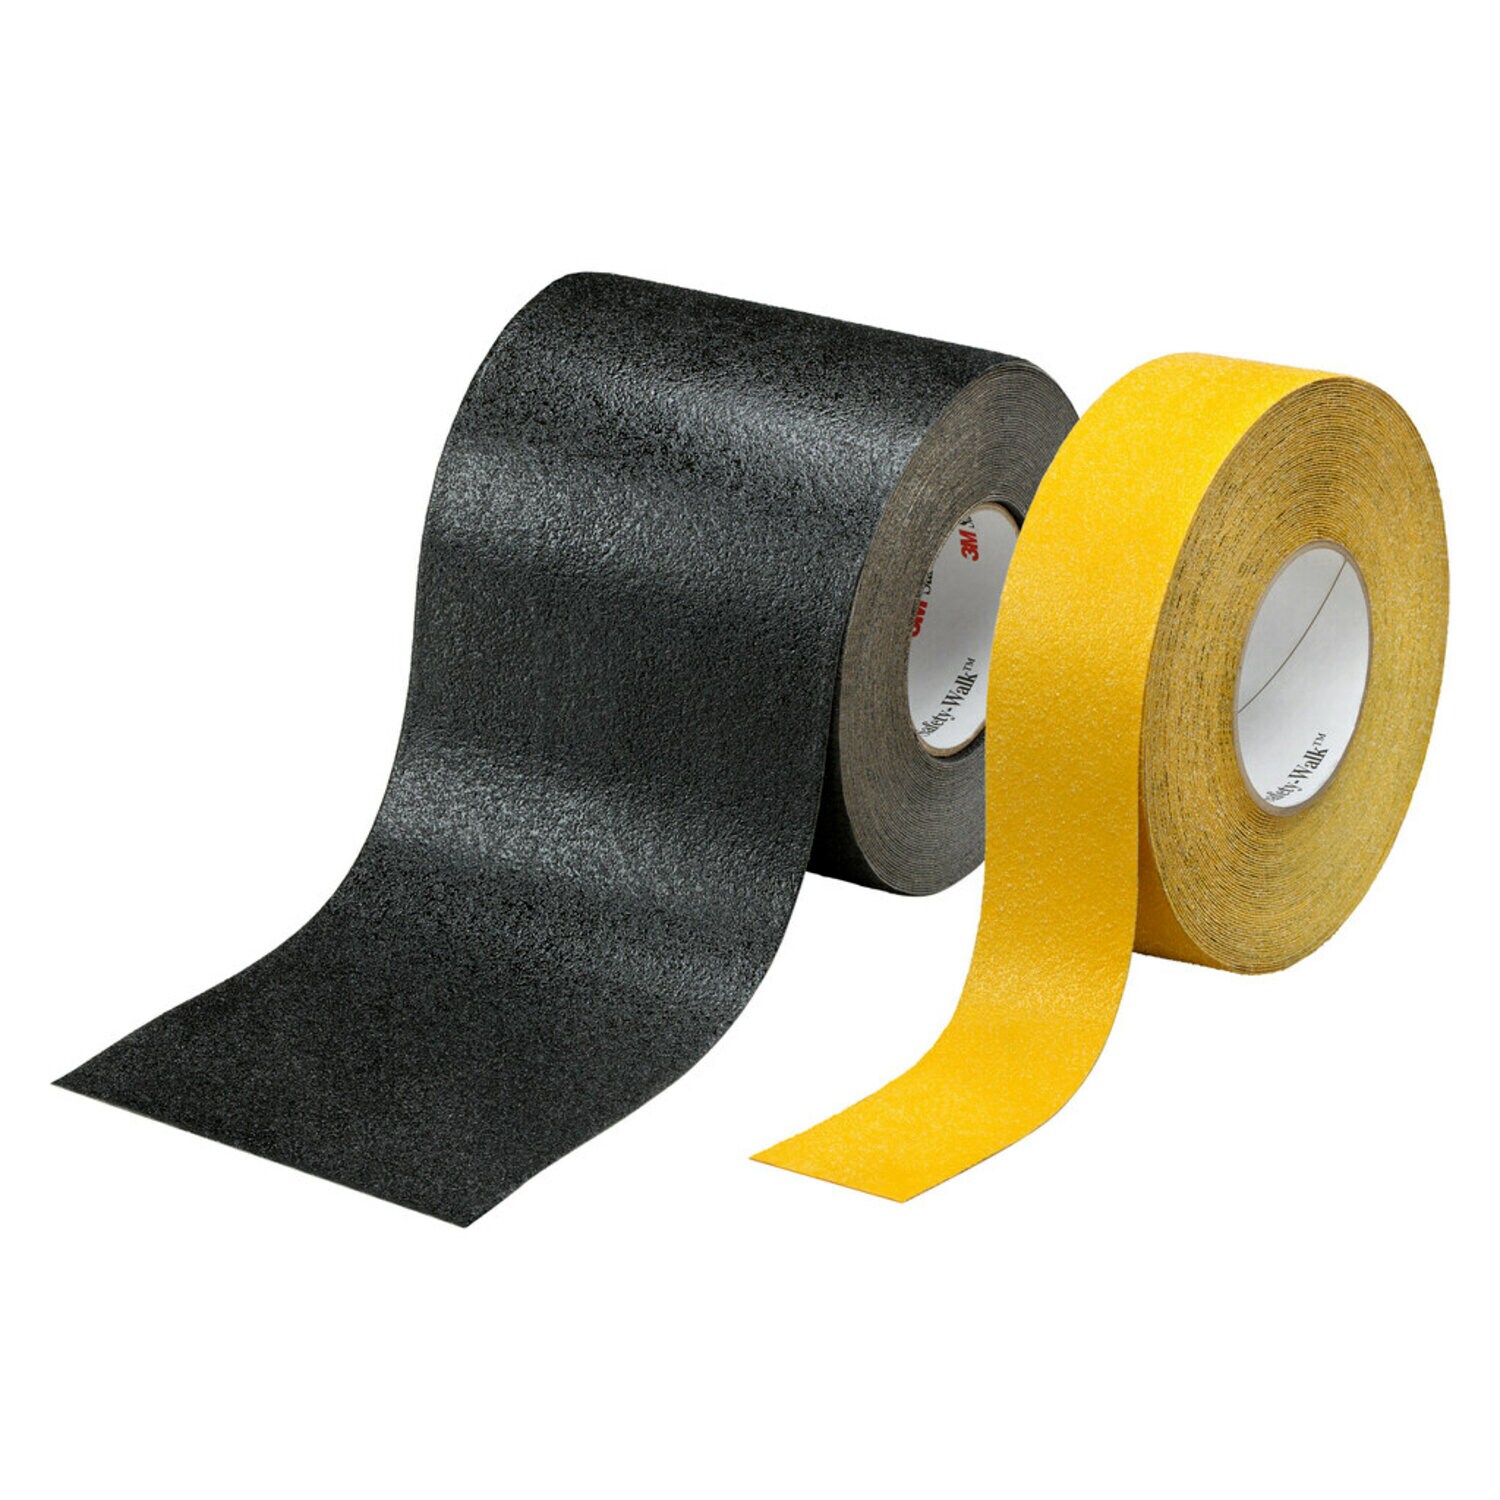 7100221159 - 3M Safety-Walk Slip-Resistant Conformable Tapes & Treads 588, White
Printable, 24 in x 15 ft, 1 Roll/Case, Sample